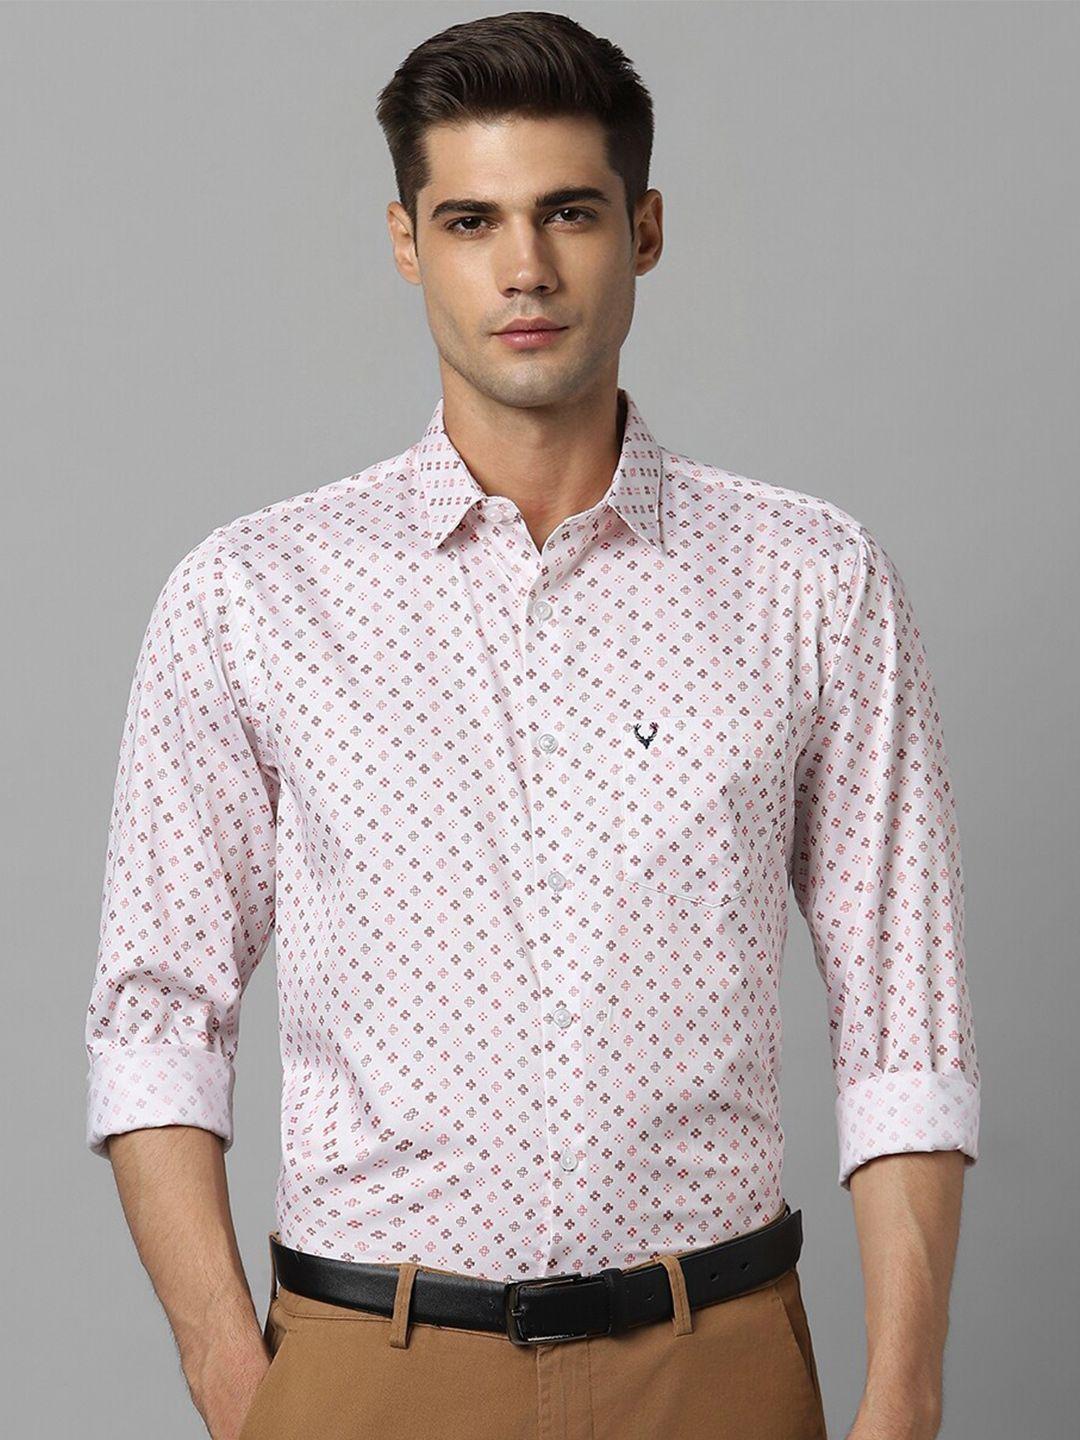 allen solly geometric printed slim fit opaque cotton formal shirt